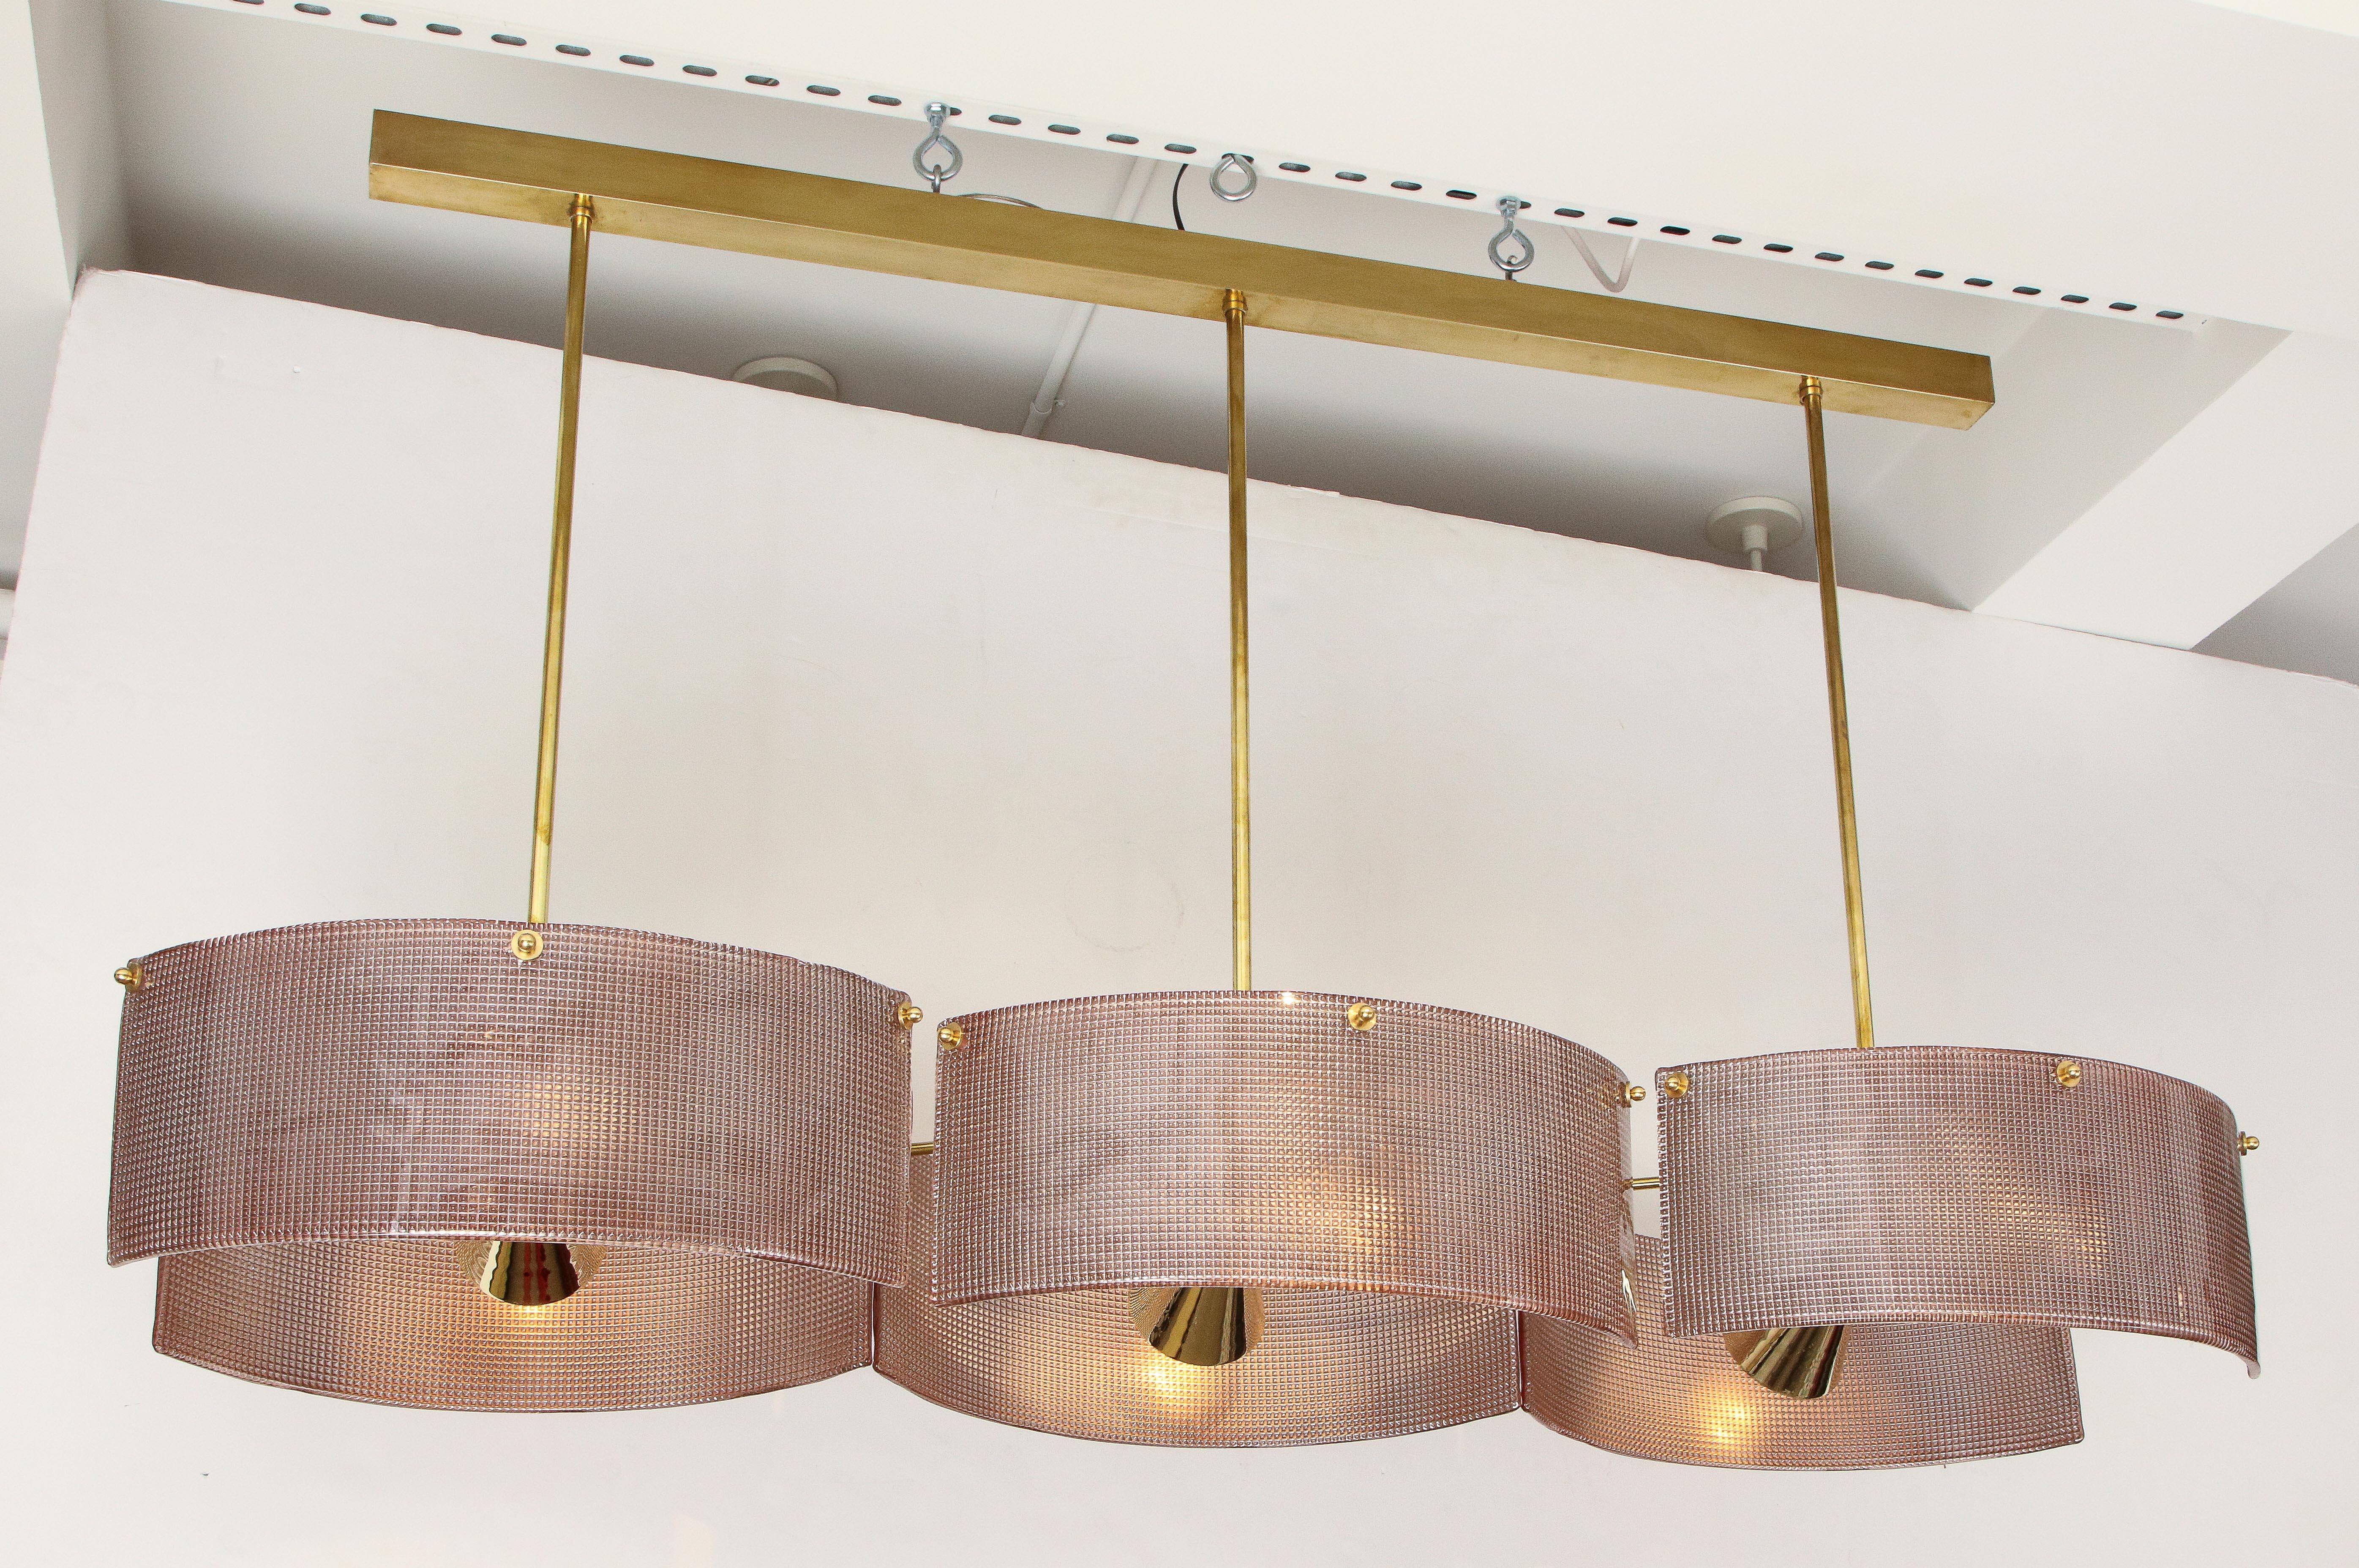 This sophisticated Italian chandelier is made of brass and hand casted pink blush colored Murano glass. It consists of six curved pieces of textured, blush Murano glass shields or plates with suspended brass spot lights reflecting light off of each